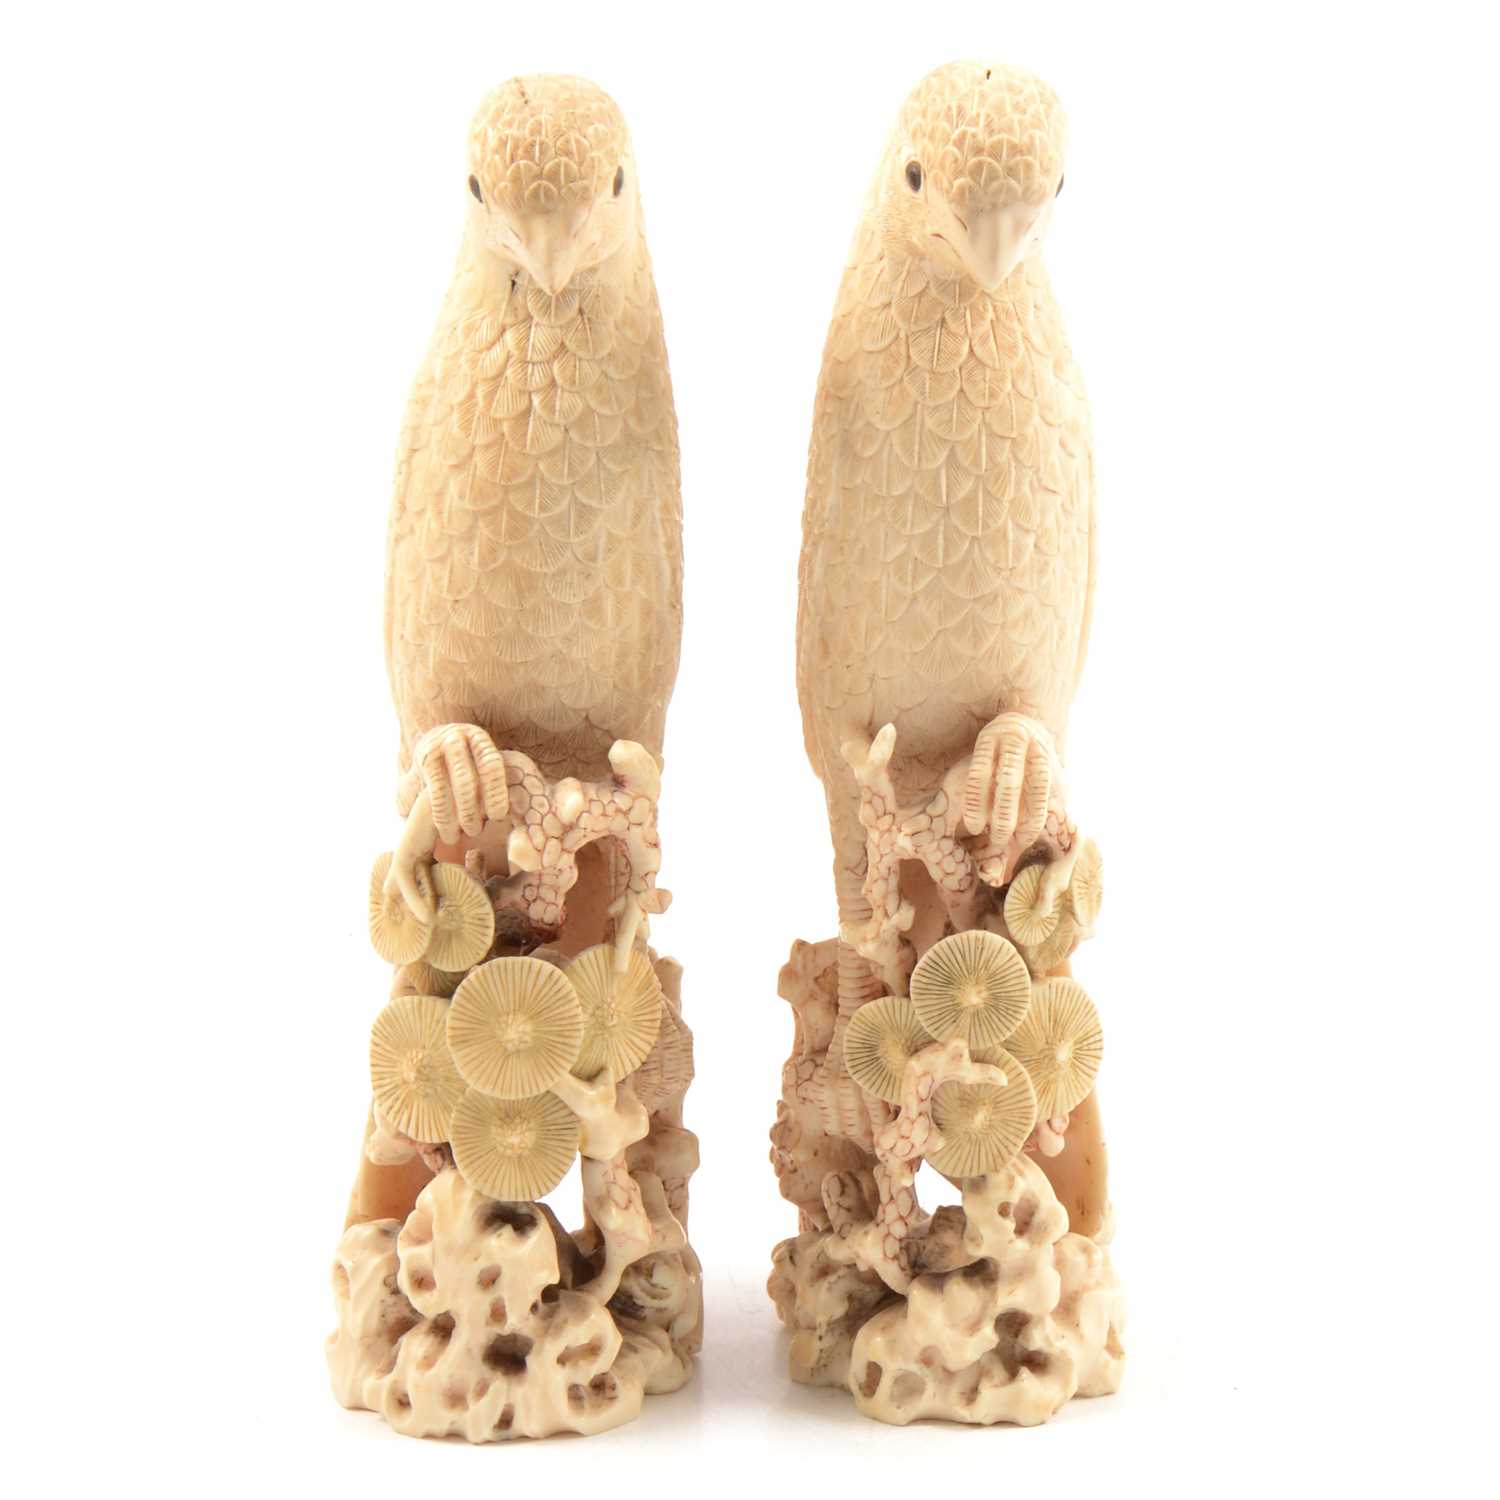 Lot 122 - Pair of Japanese carved ivory parrots, Meiji period